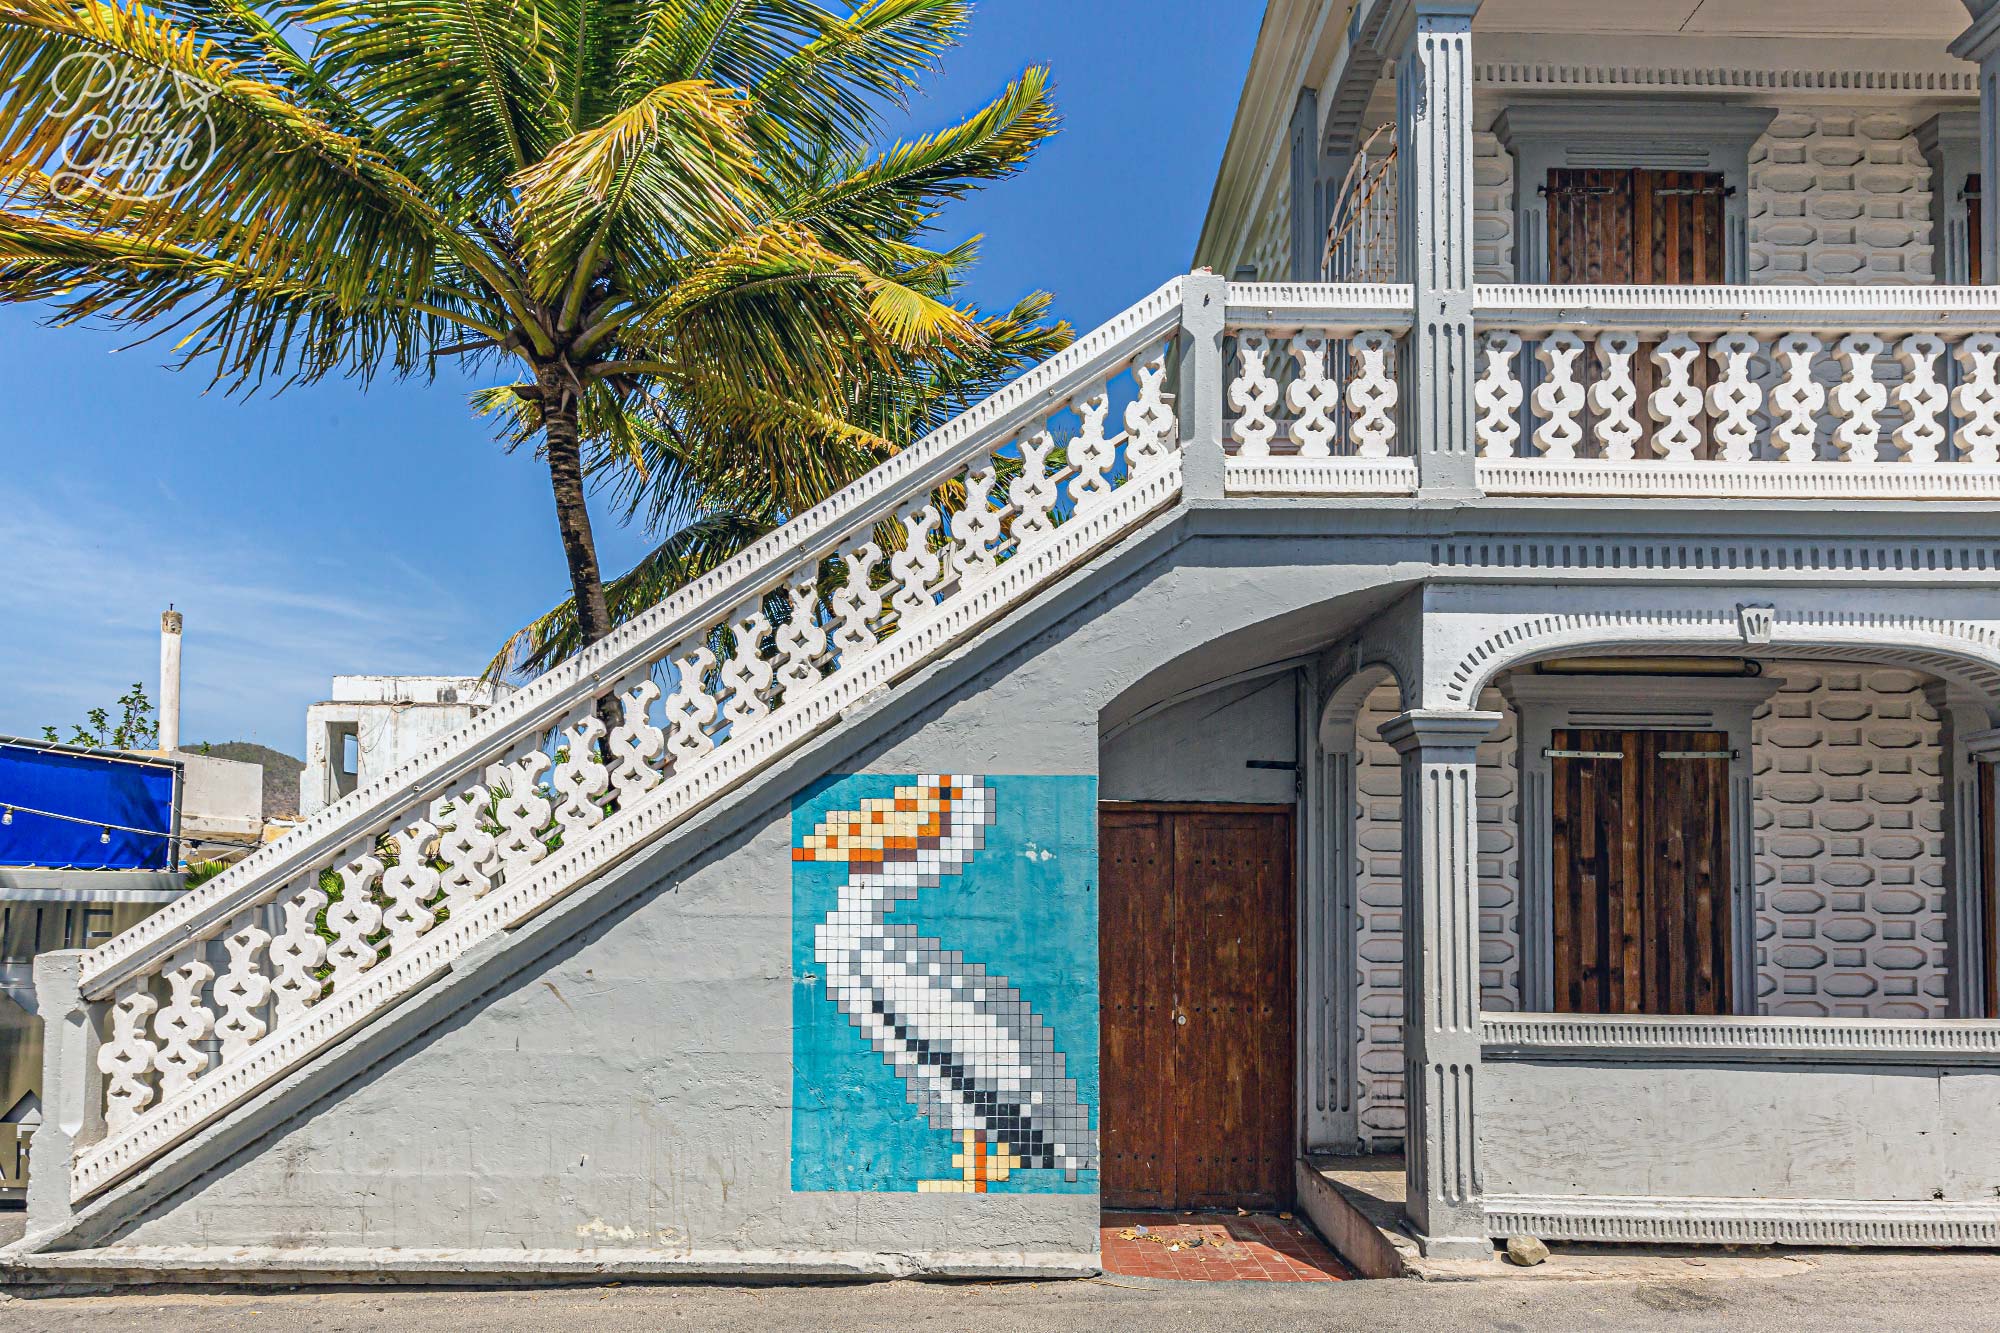 Look out for various pieces of street art in Grand Case